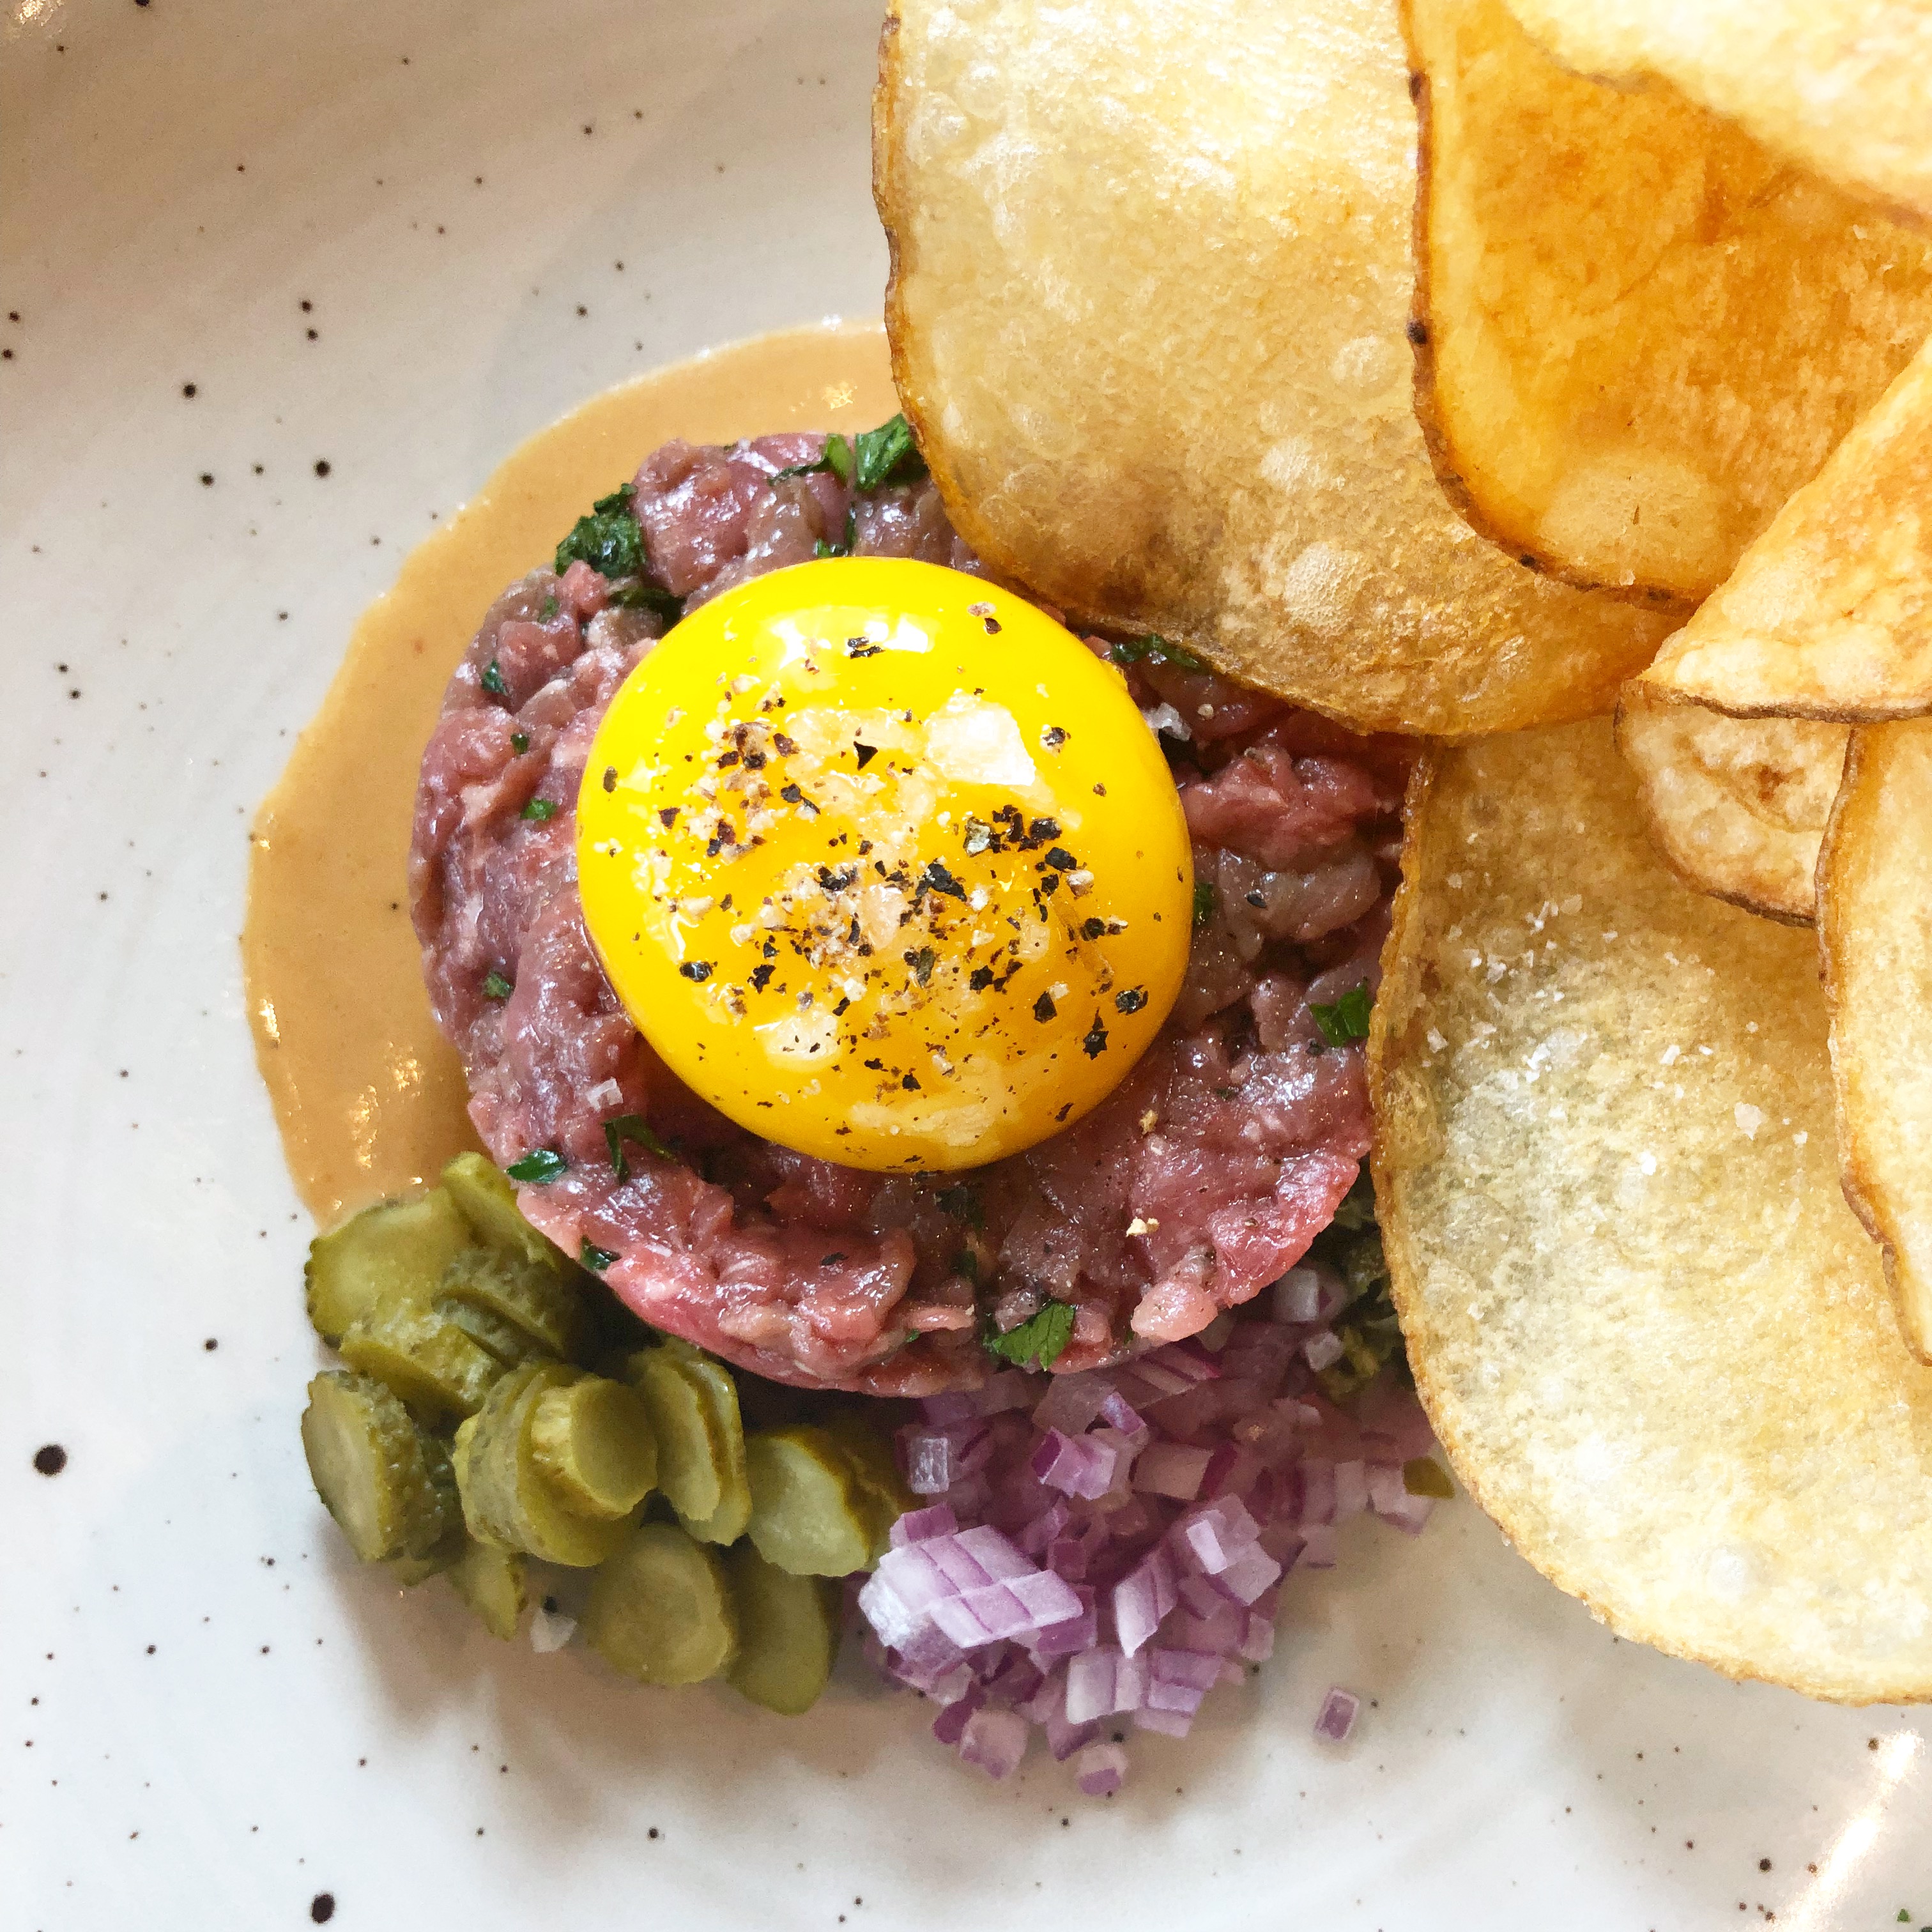 Steak tartare is topped with a fat yellow yolk, with cornichons and chips, at Bistro Agnes.